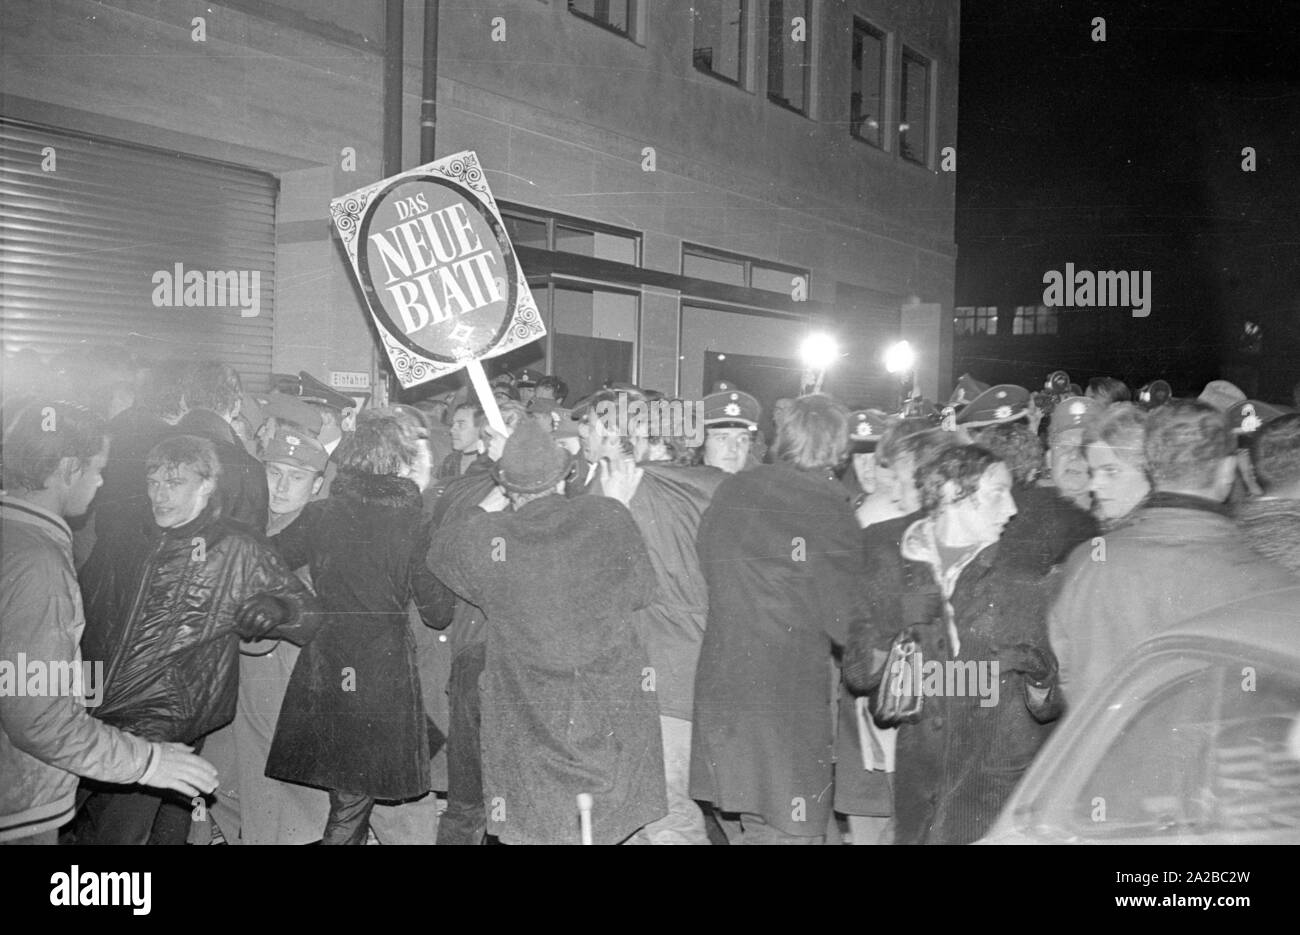 After the assassination attempt on Rudi Dutschke, actions took place against the Springer publishing house throughout Germany on the Easter weekend 1968. In Munich, demonstrators try to stop the delivery of the Bild-Zeitung through the barricade of the Munich bookshop on Schellingstrasse (either 12.04 or 15.04.).  Pictured: Melee between protesters and police. Stock Photo